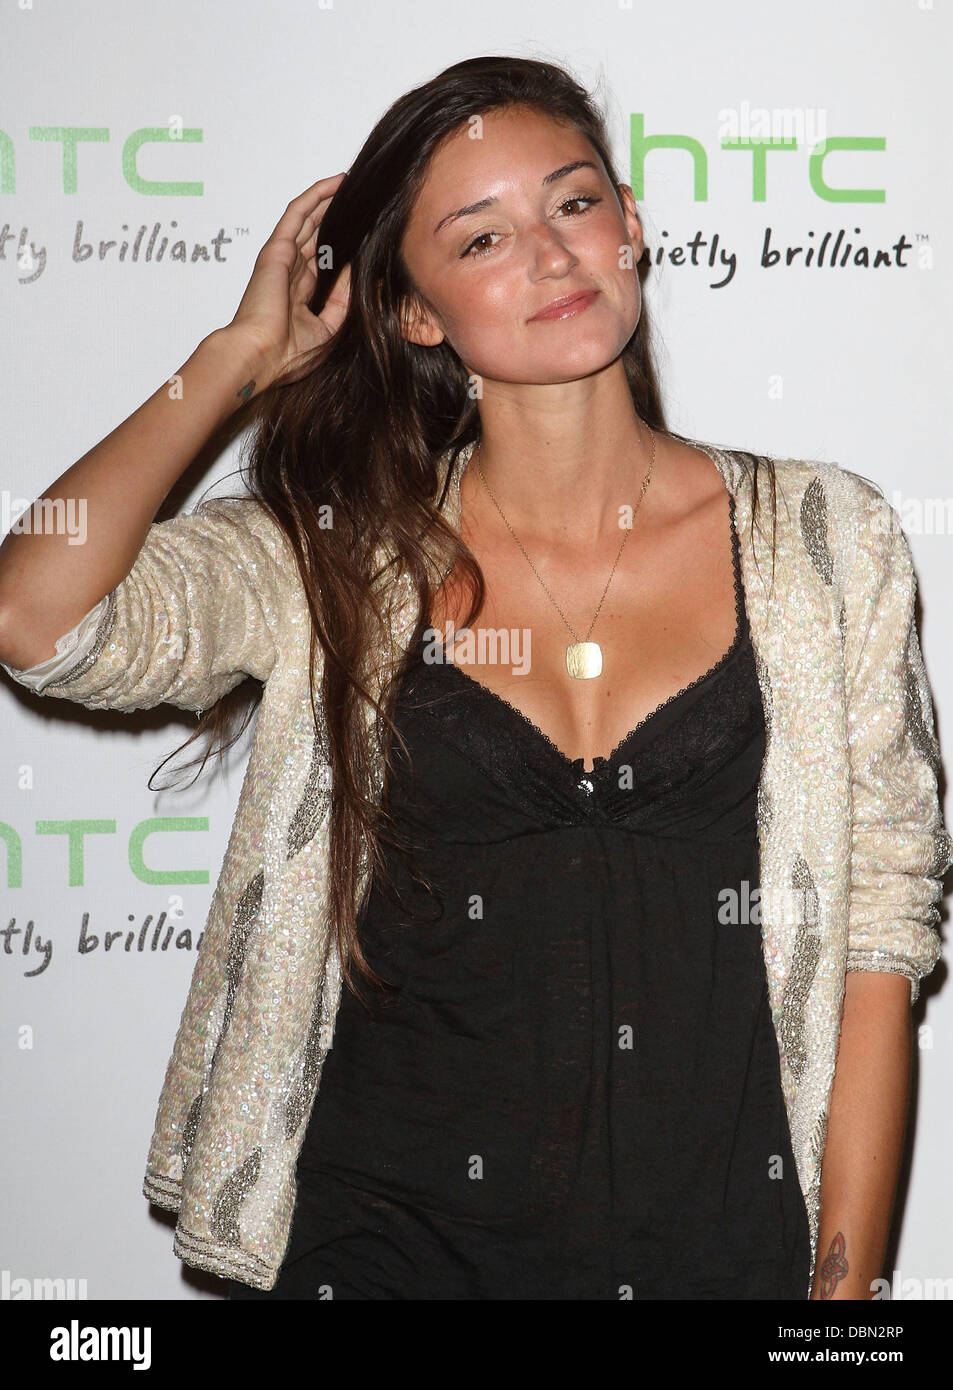 Caroline D'Amore The HTC Status Social launch event held at Paramount Studios - Arrivals Los Angeles, California - 19.07.11 Stock Photo